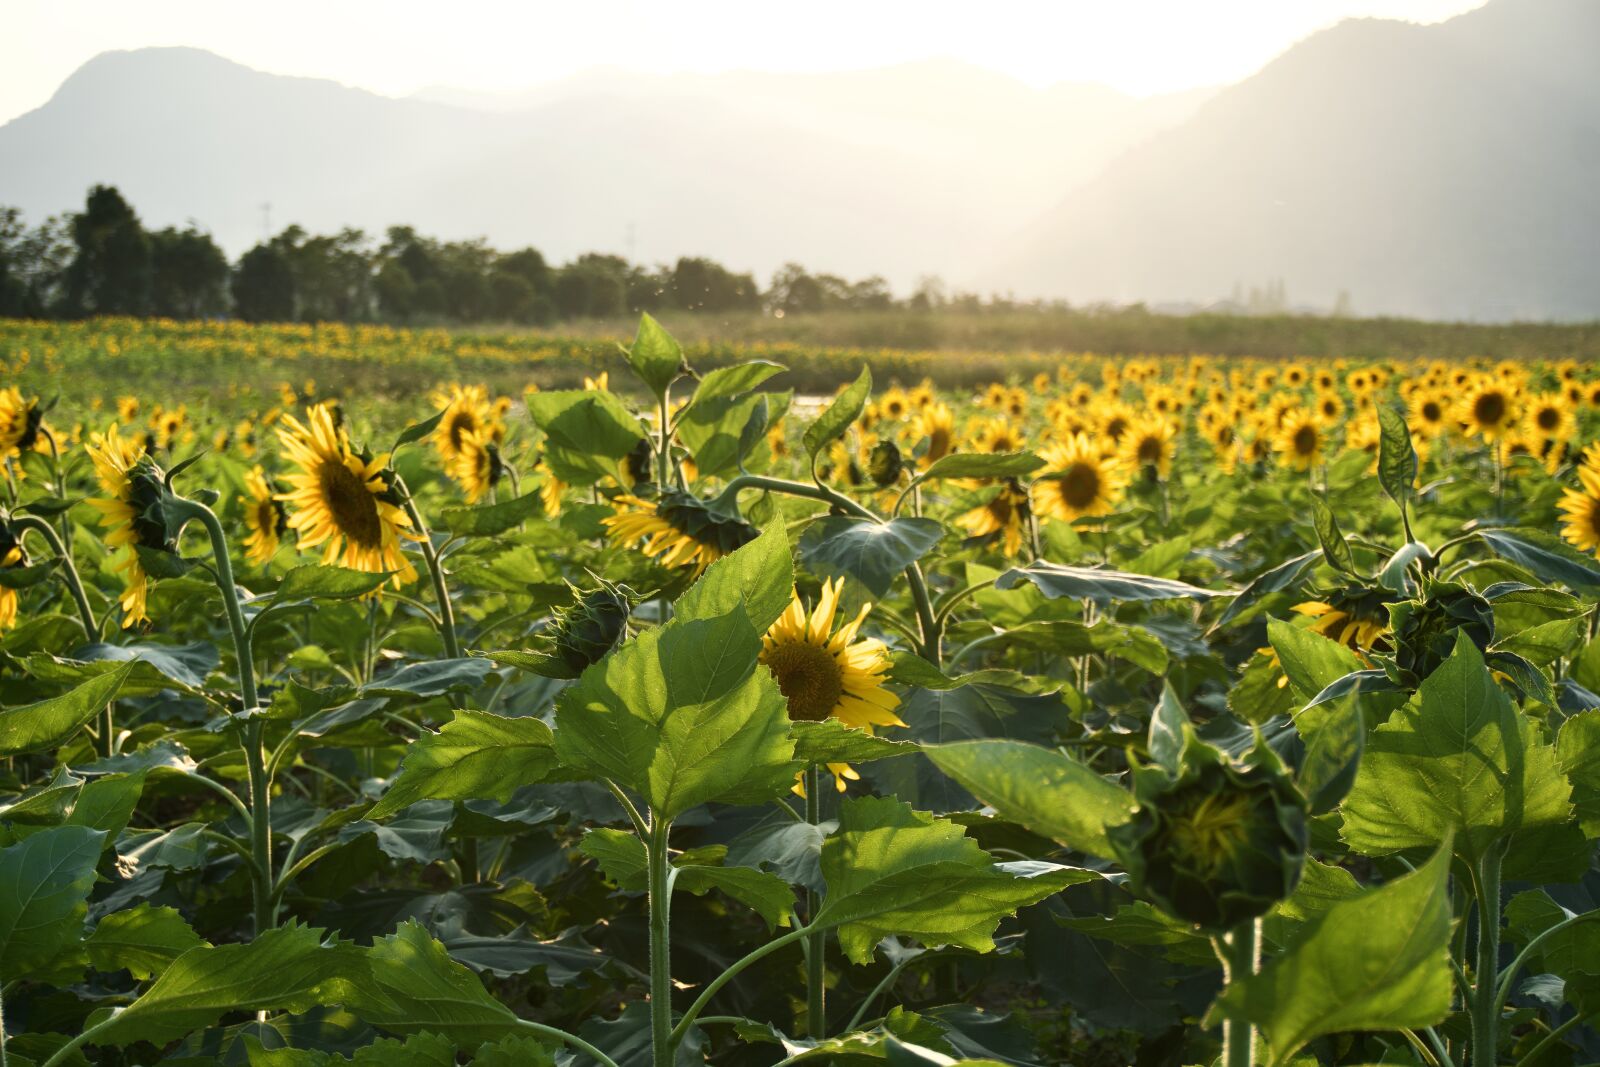 Sony a6400 sample photo. "Field, sunflowers, flowers" photography